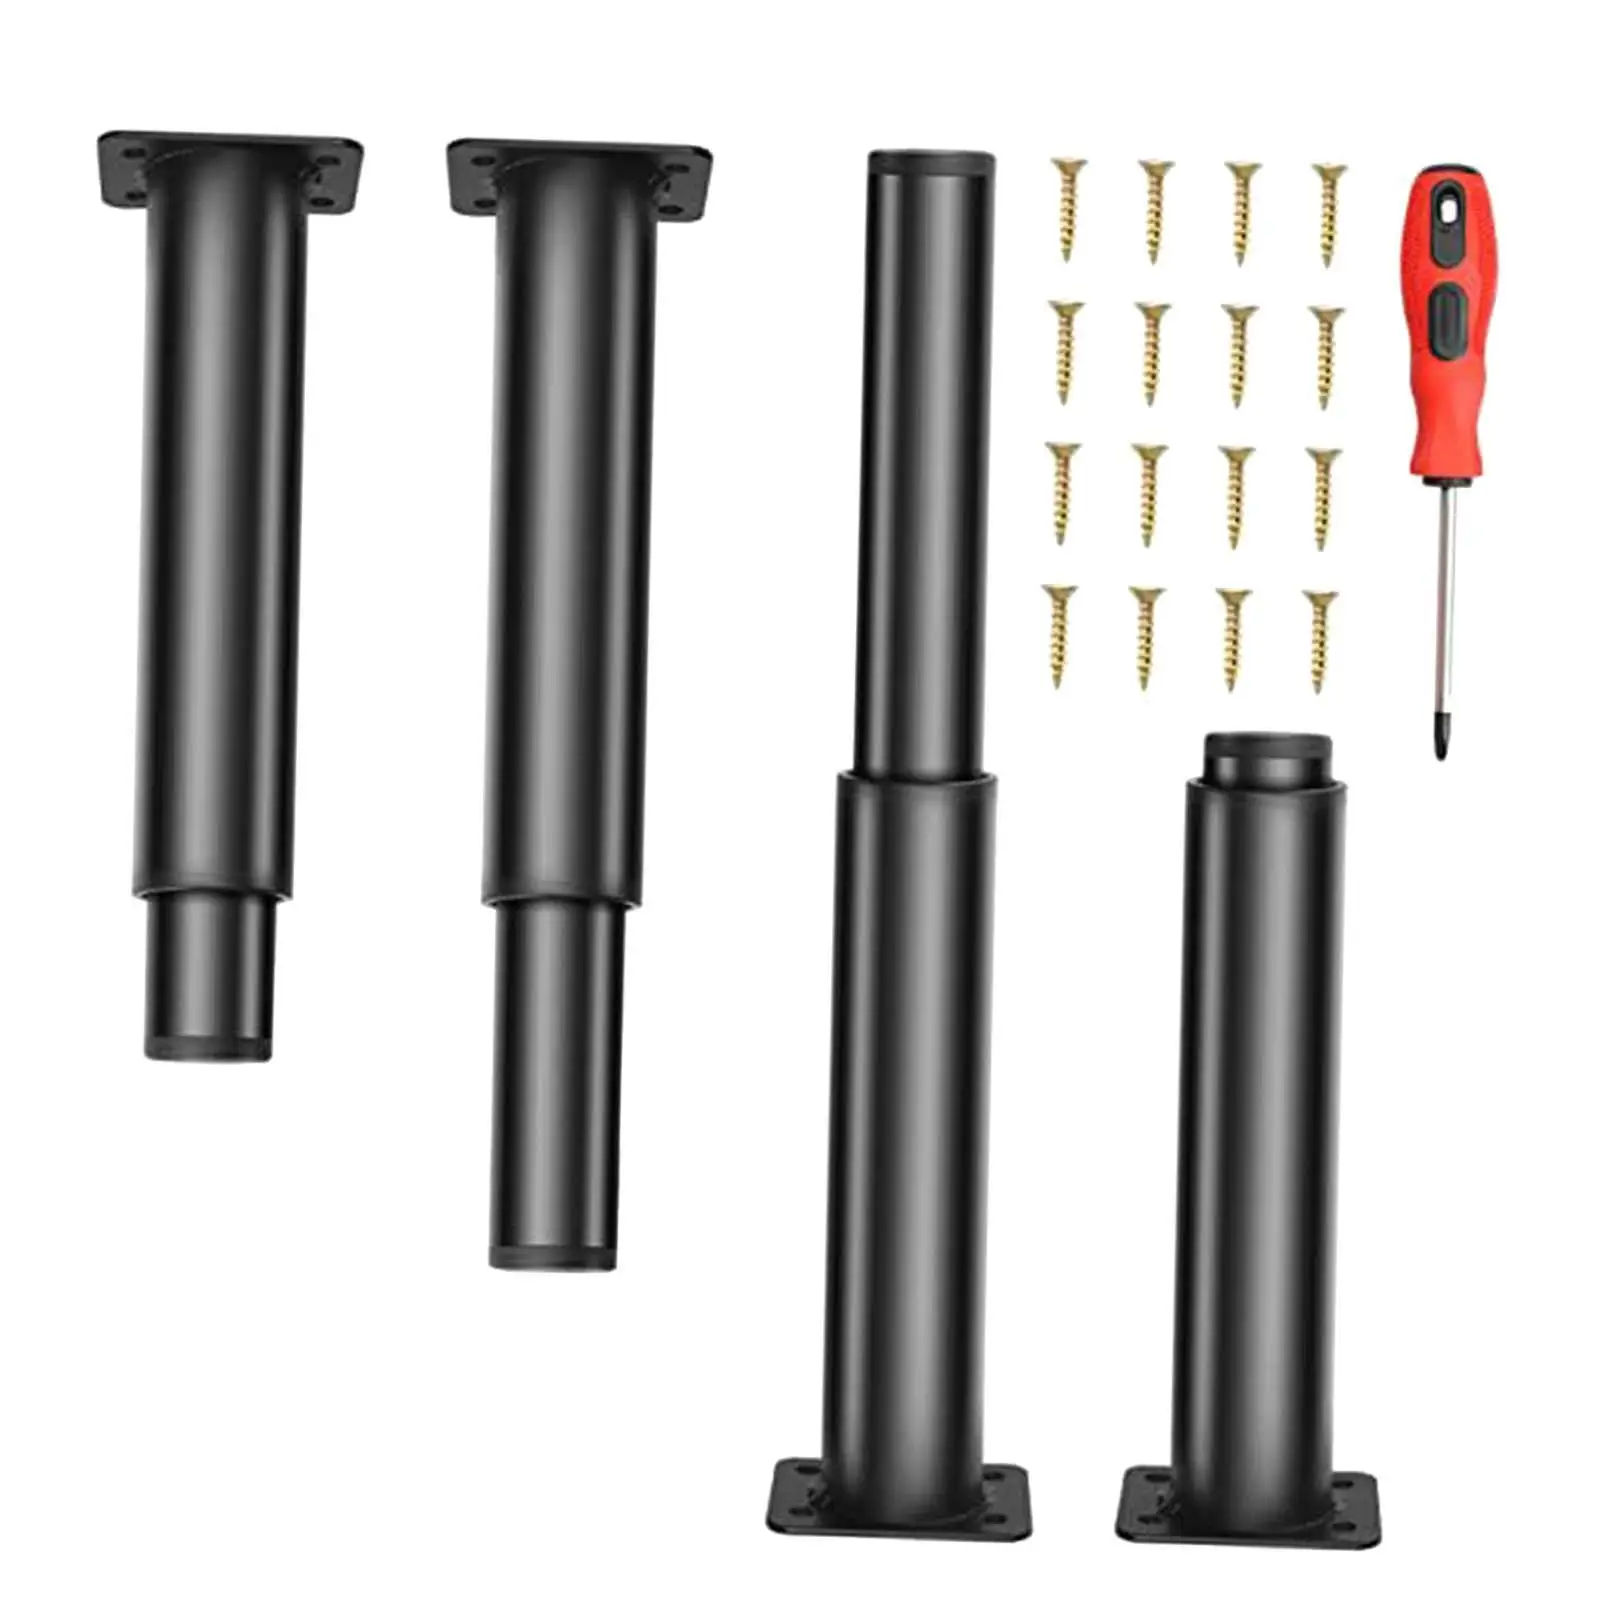 4 Pieces Metal Adjustable Leg for Table Black for TV Stand Desks Coffee Table